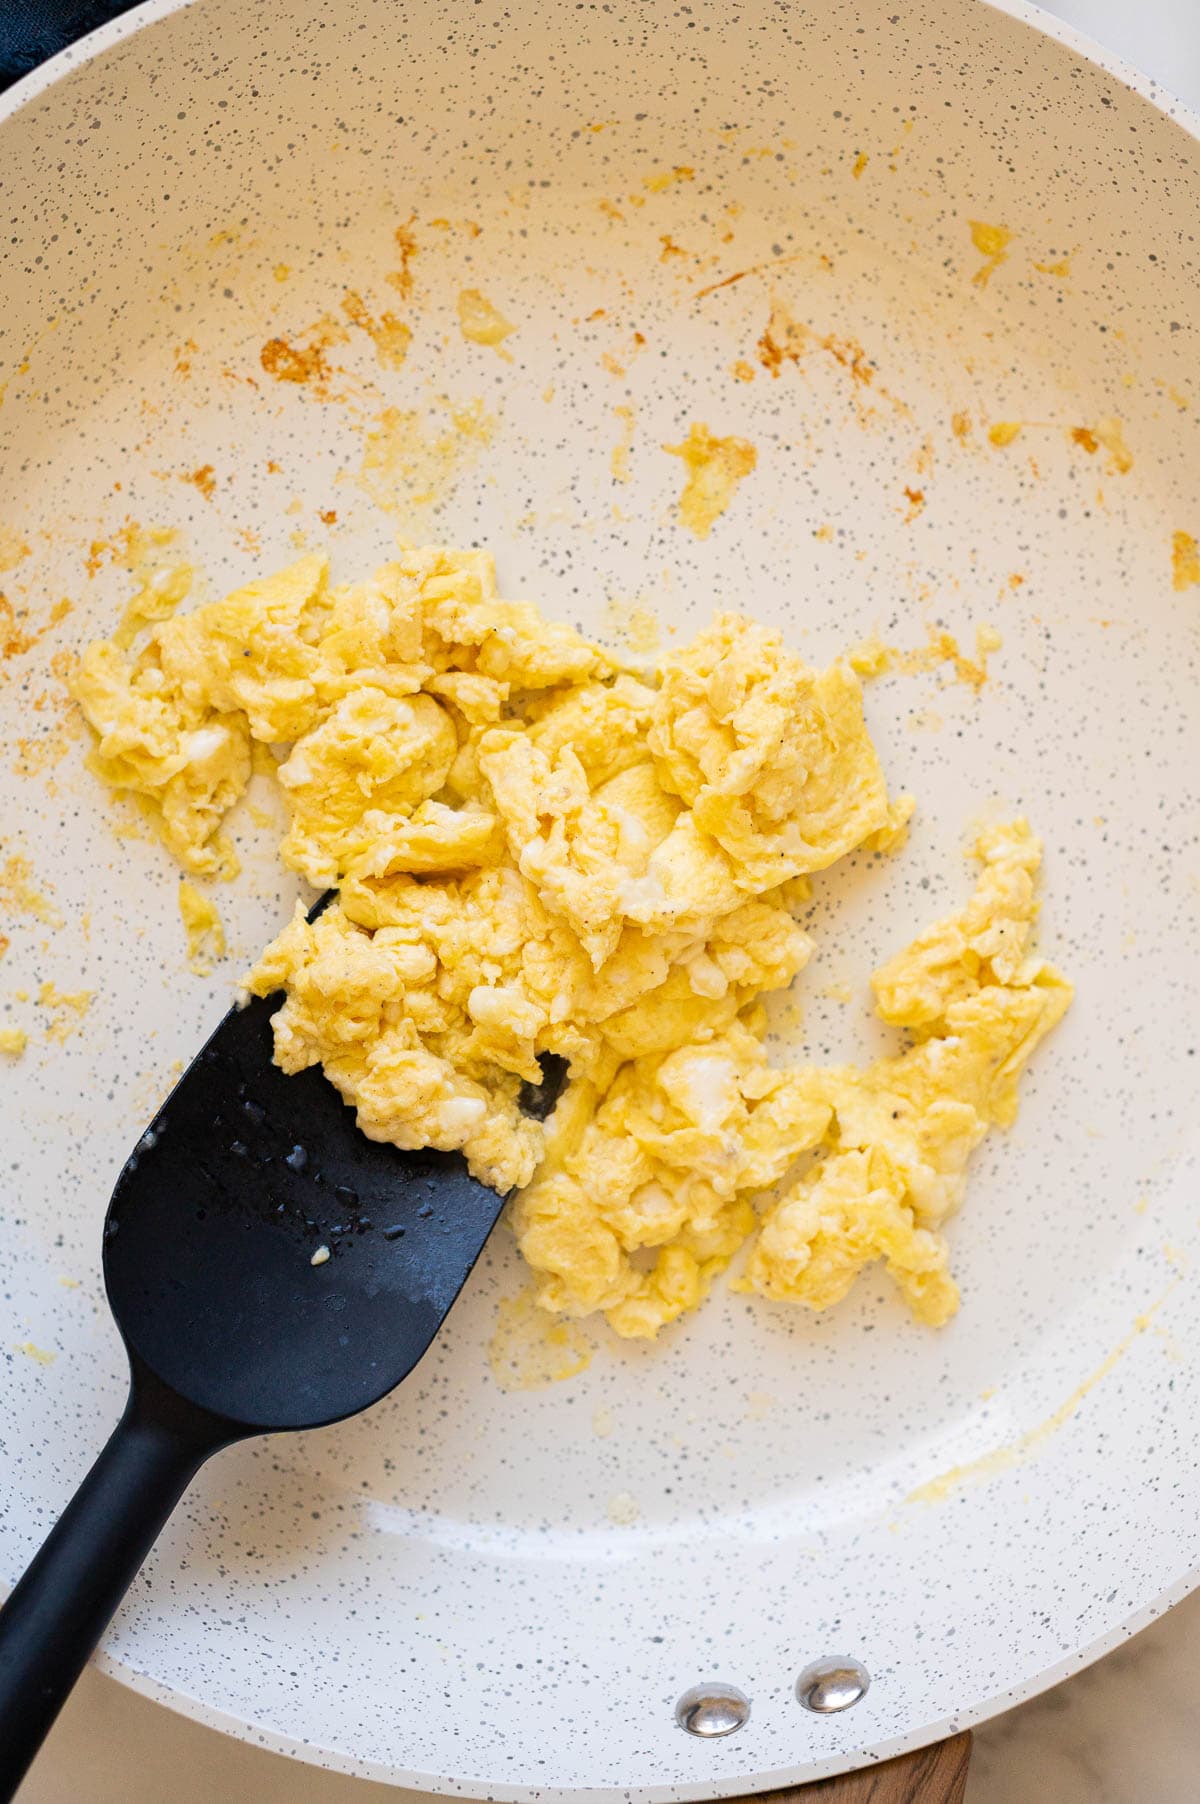 Cottage cheese scrambled eggs in a skillet with spatula.